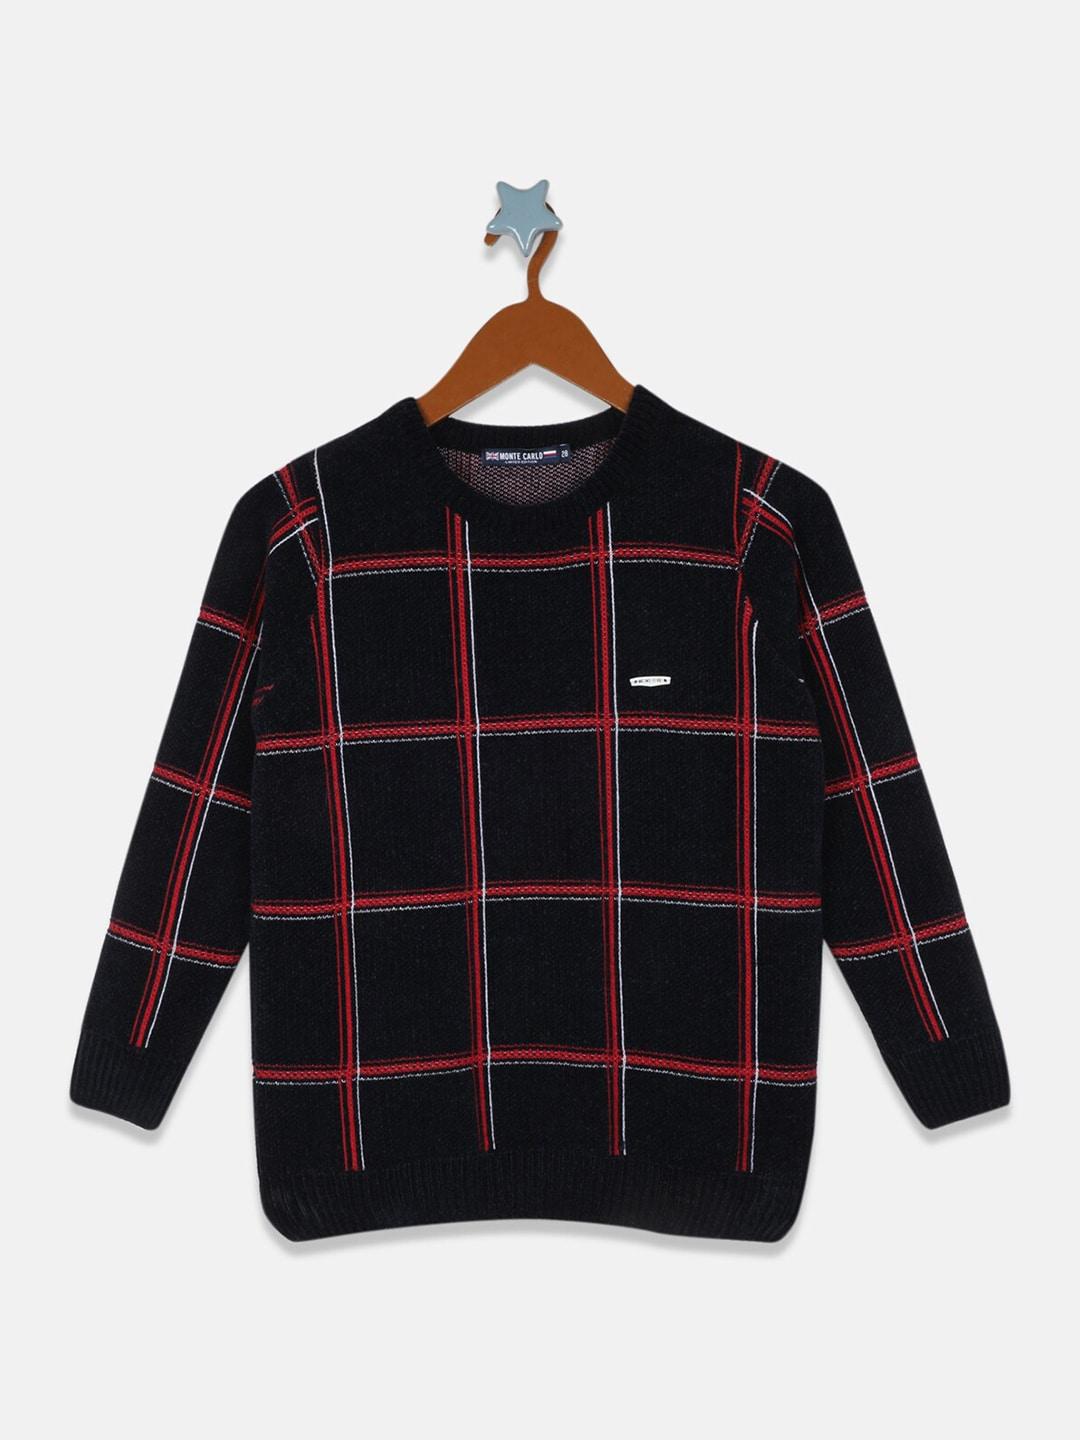 Monte Carlo Boys Black & Red Checked Wool Pullover